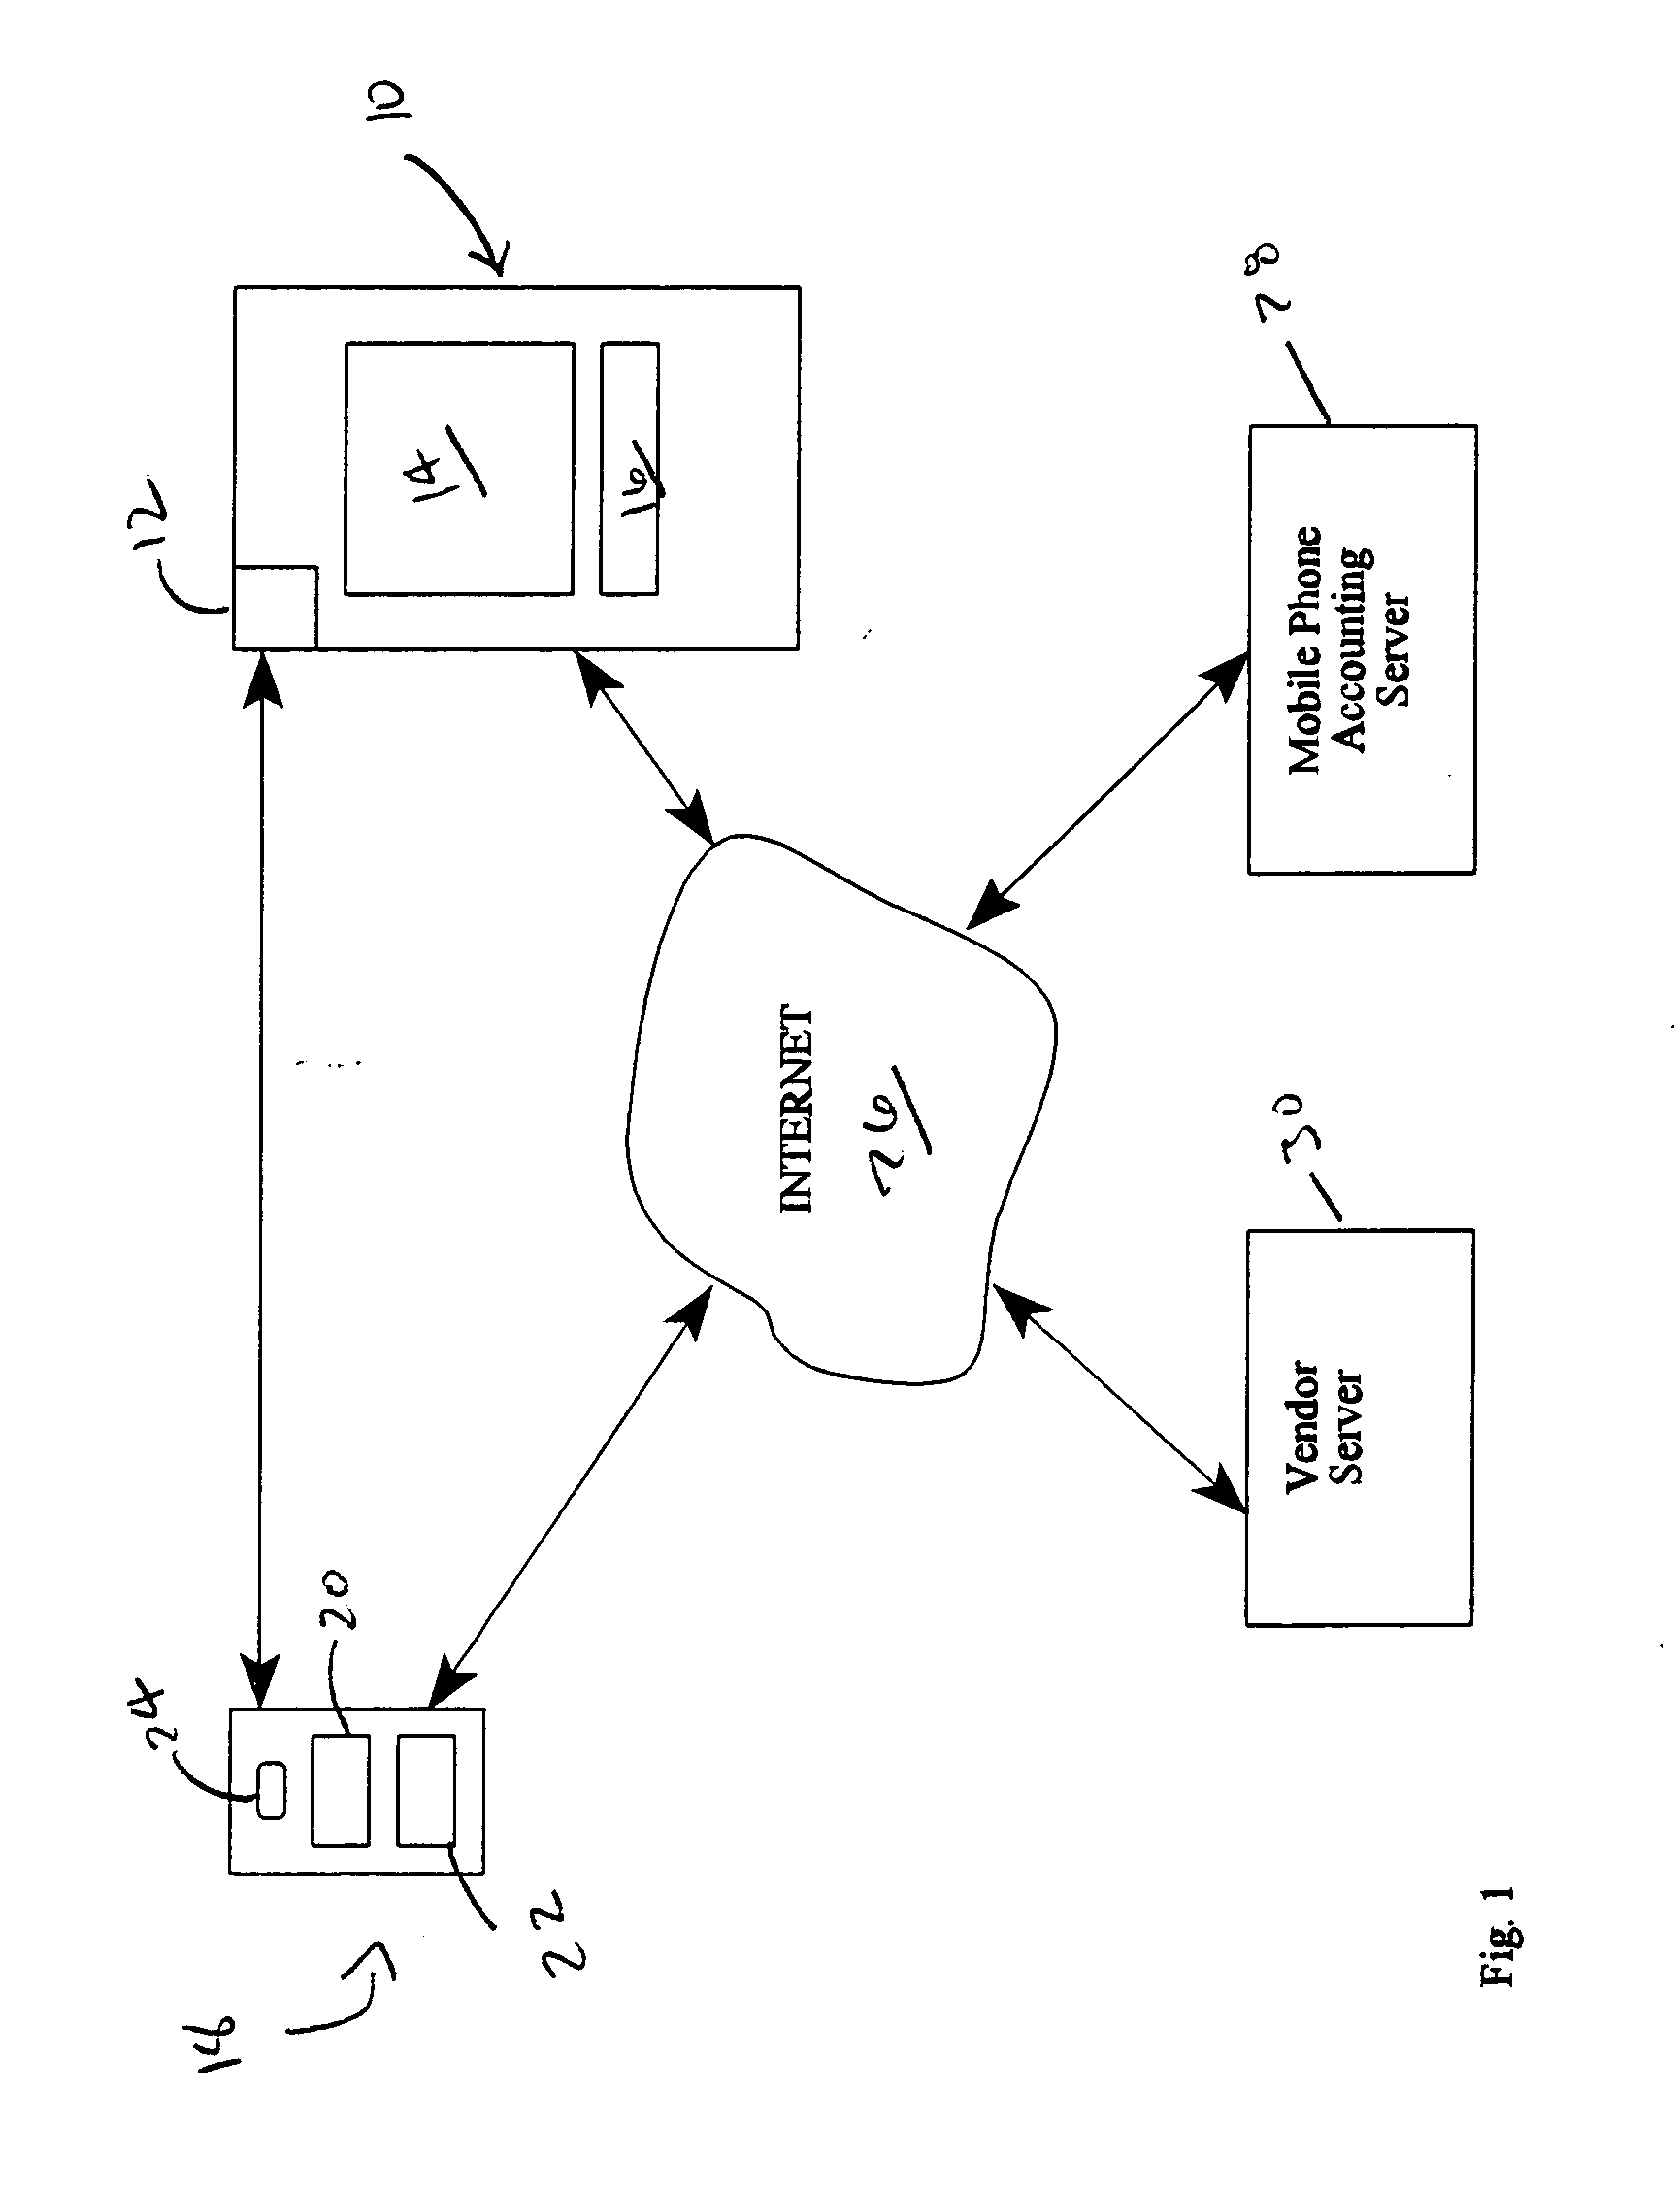 Associating mobile phone to vending machine via bar-code encoded data, CCD camera and internet connection